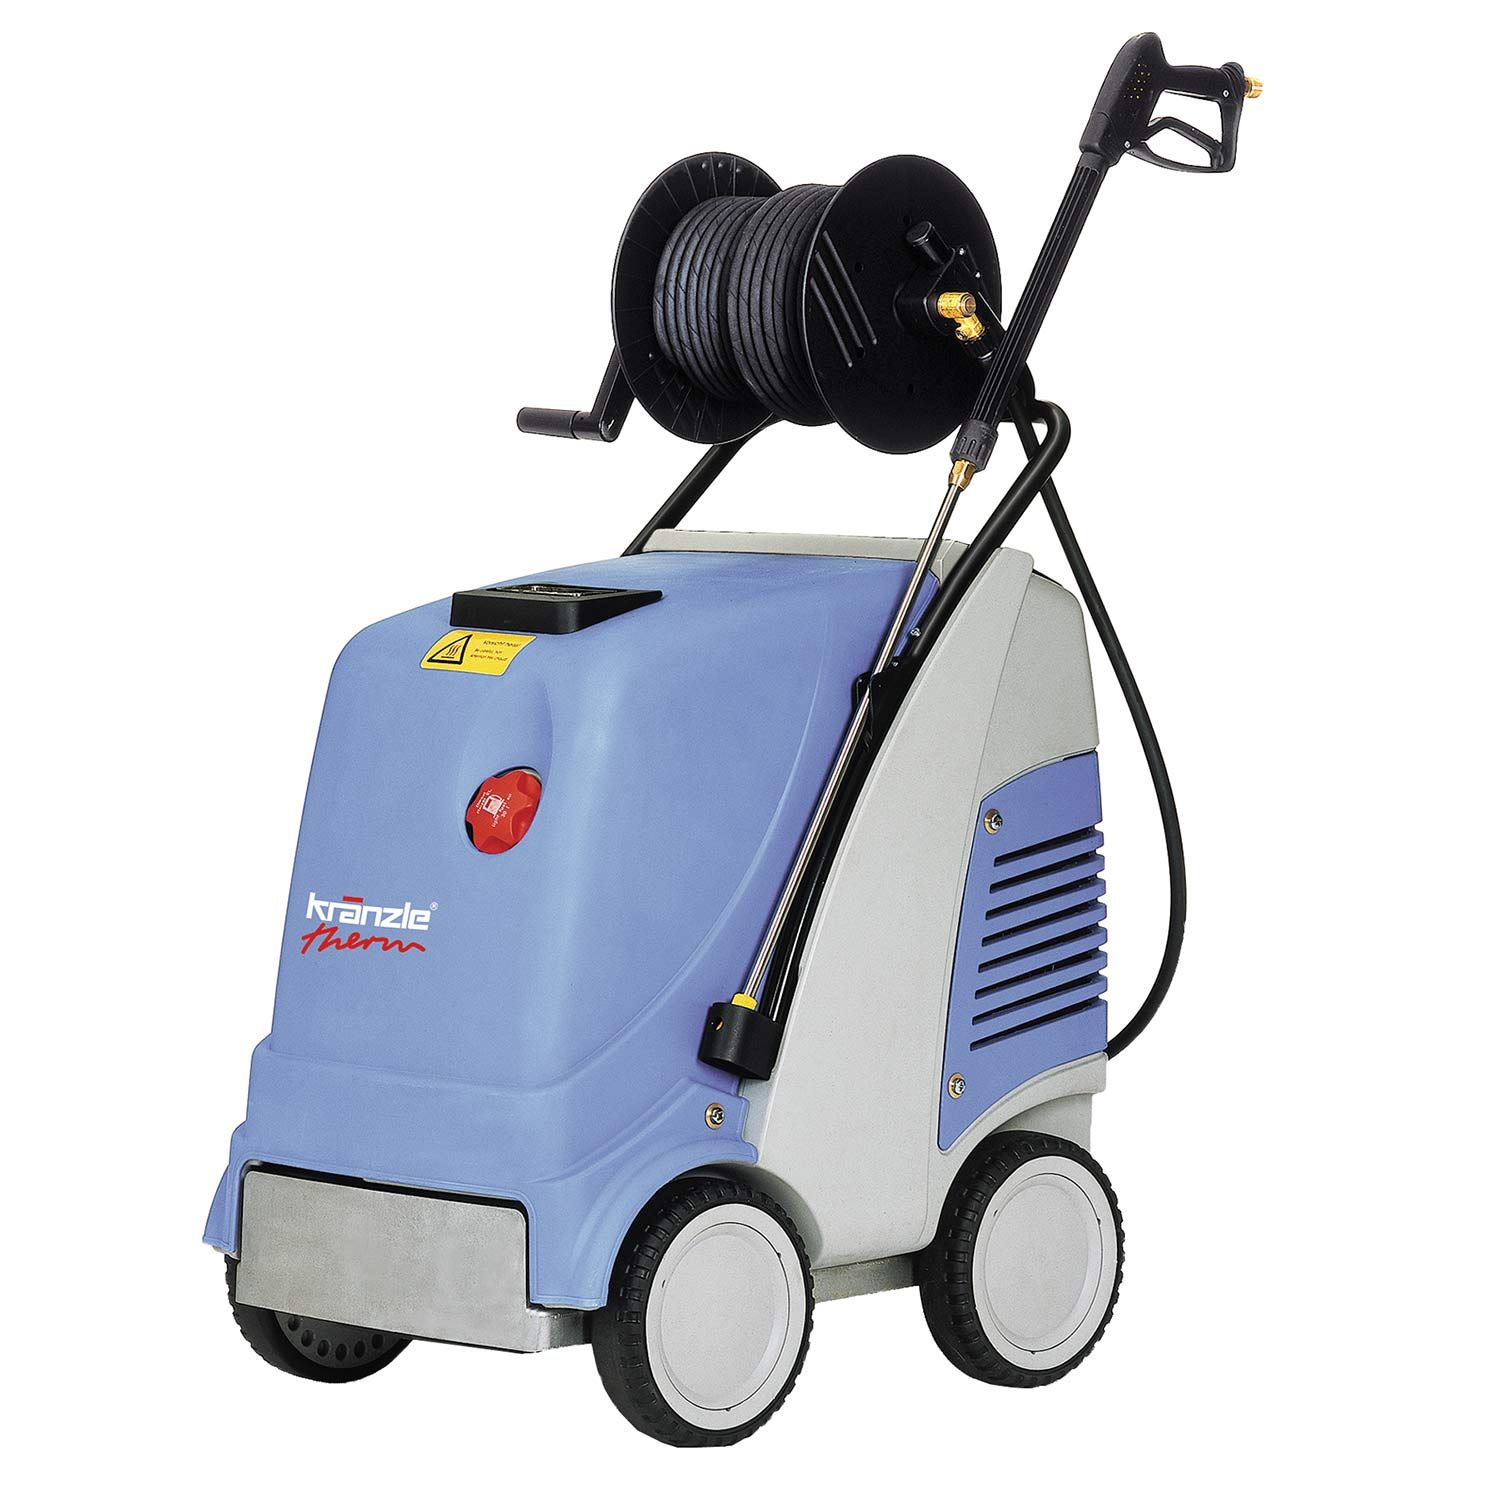 New 10 metre kranzle hot water therm pressure washer 